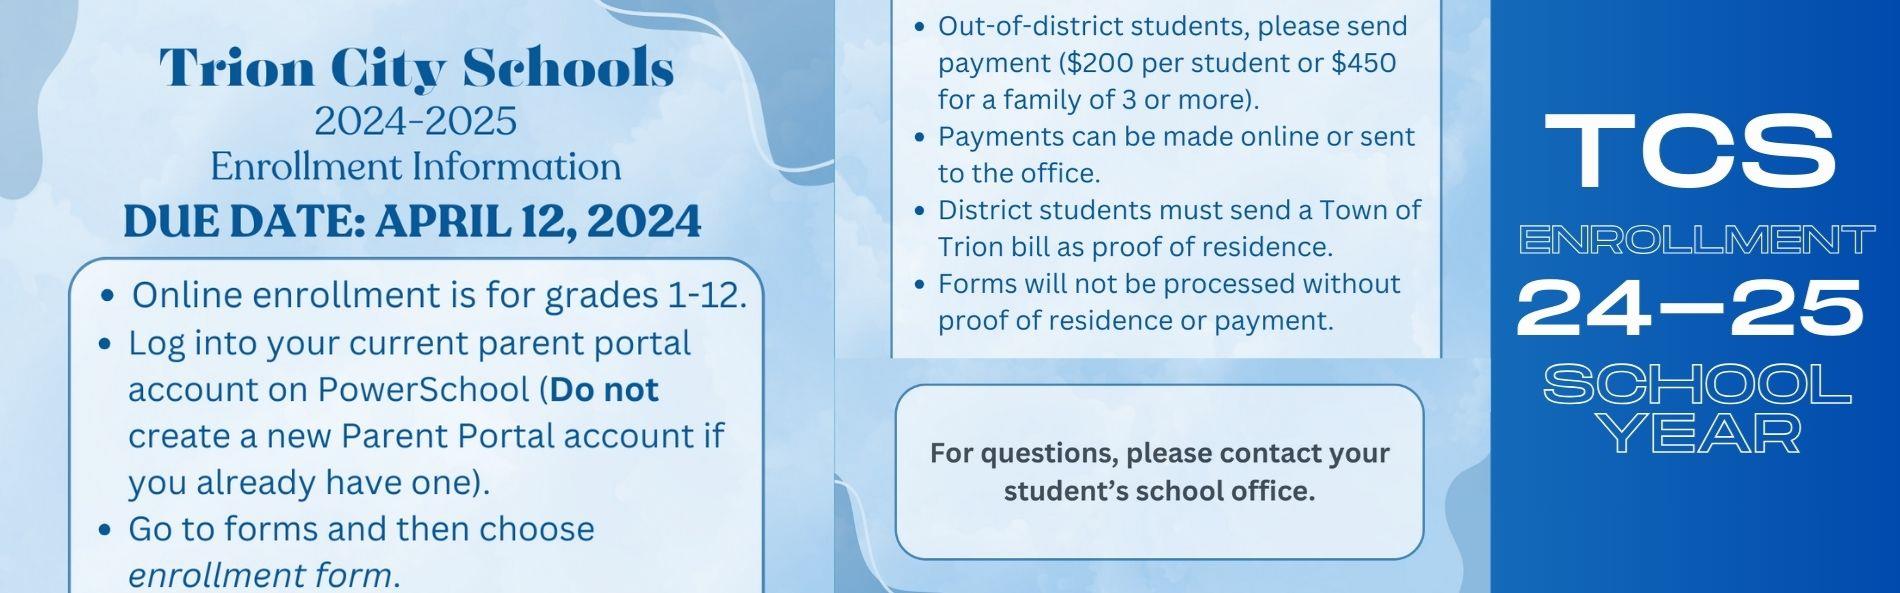 PLEASE LOG INTO THE PARENT POWERSCHOOL ACCOUNT AND COMPLETE THE ONLINE ENROLLMENT FORMS FOR EACH CHILD.